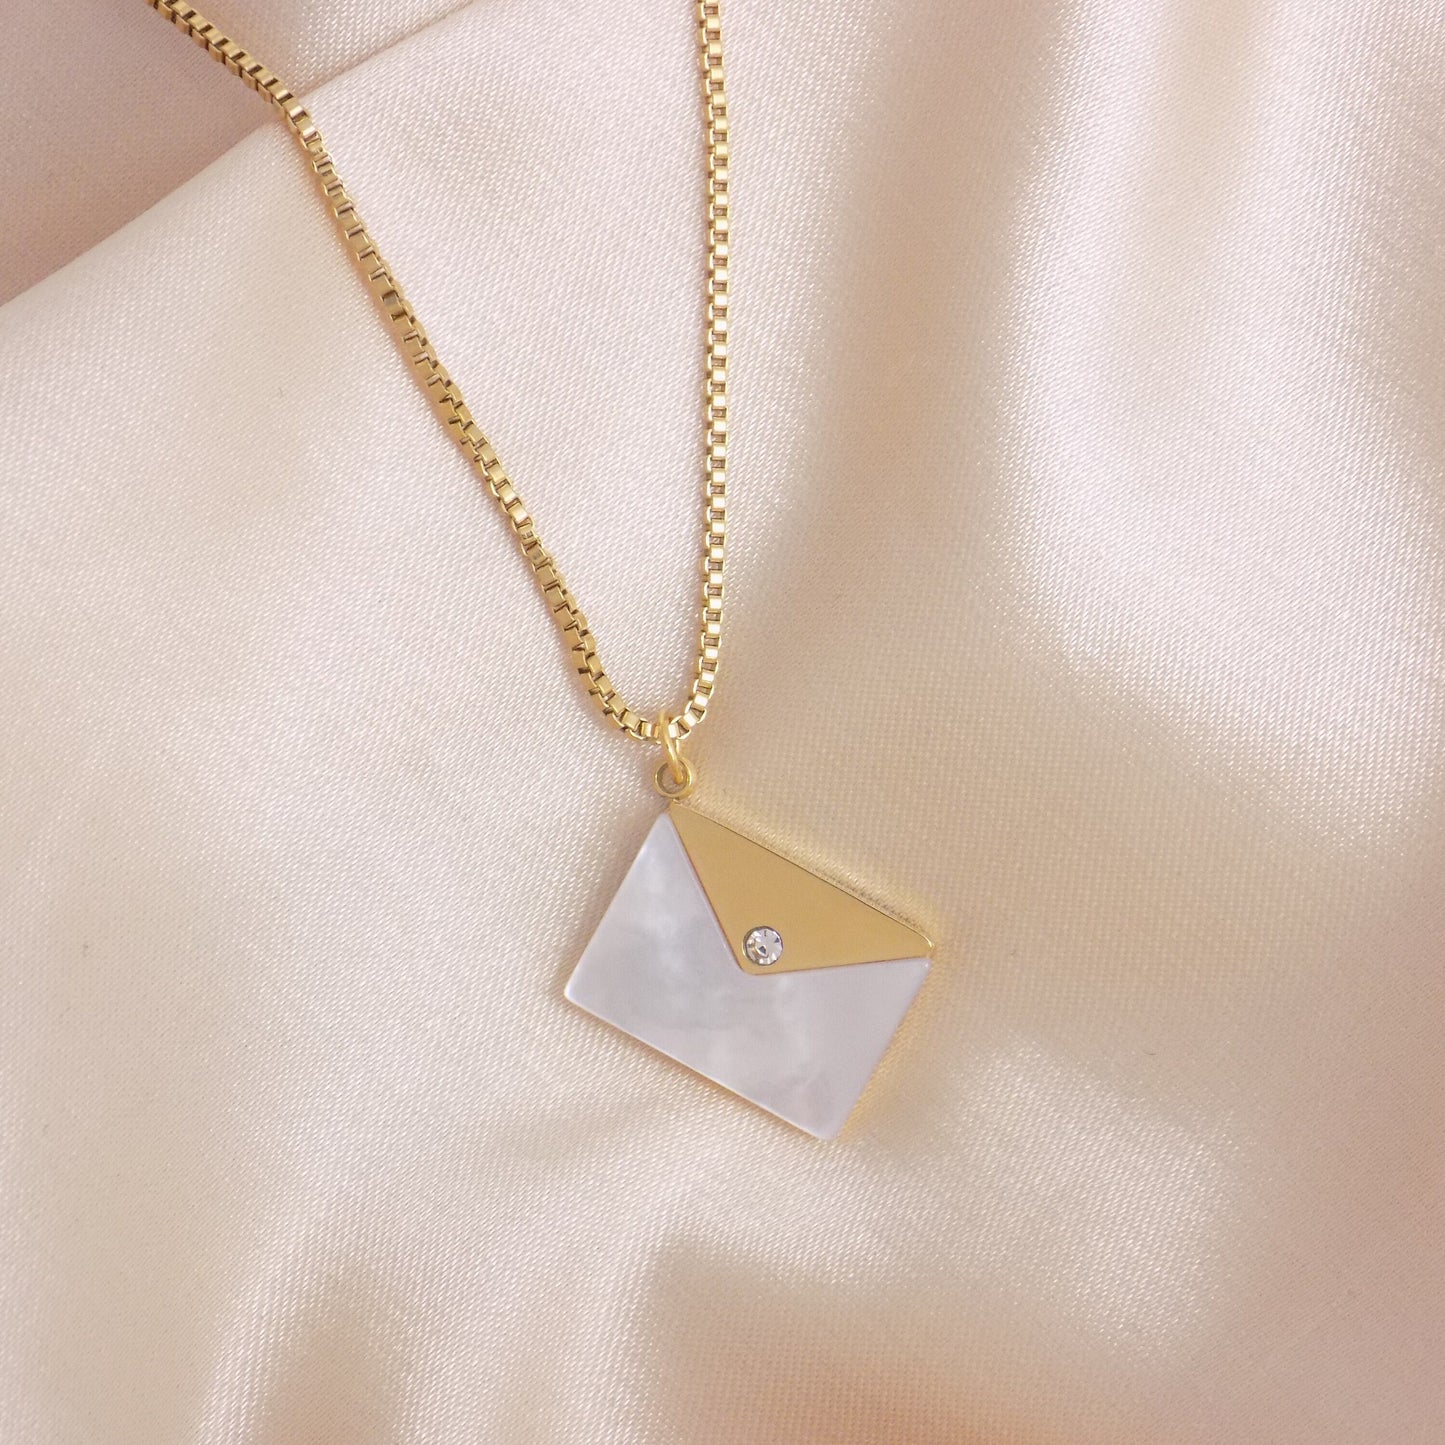 Gold Envelope Necklace with Mother of Pearl - Minimalist Layering Necklace